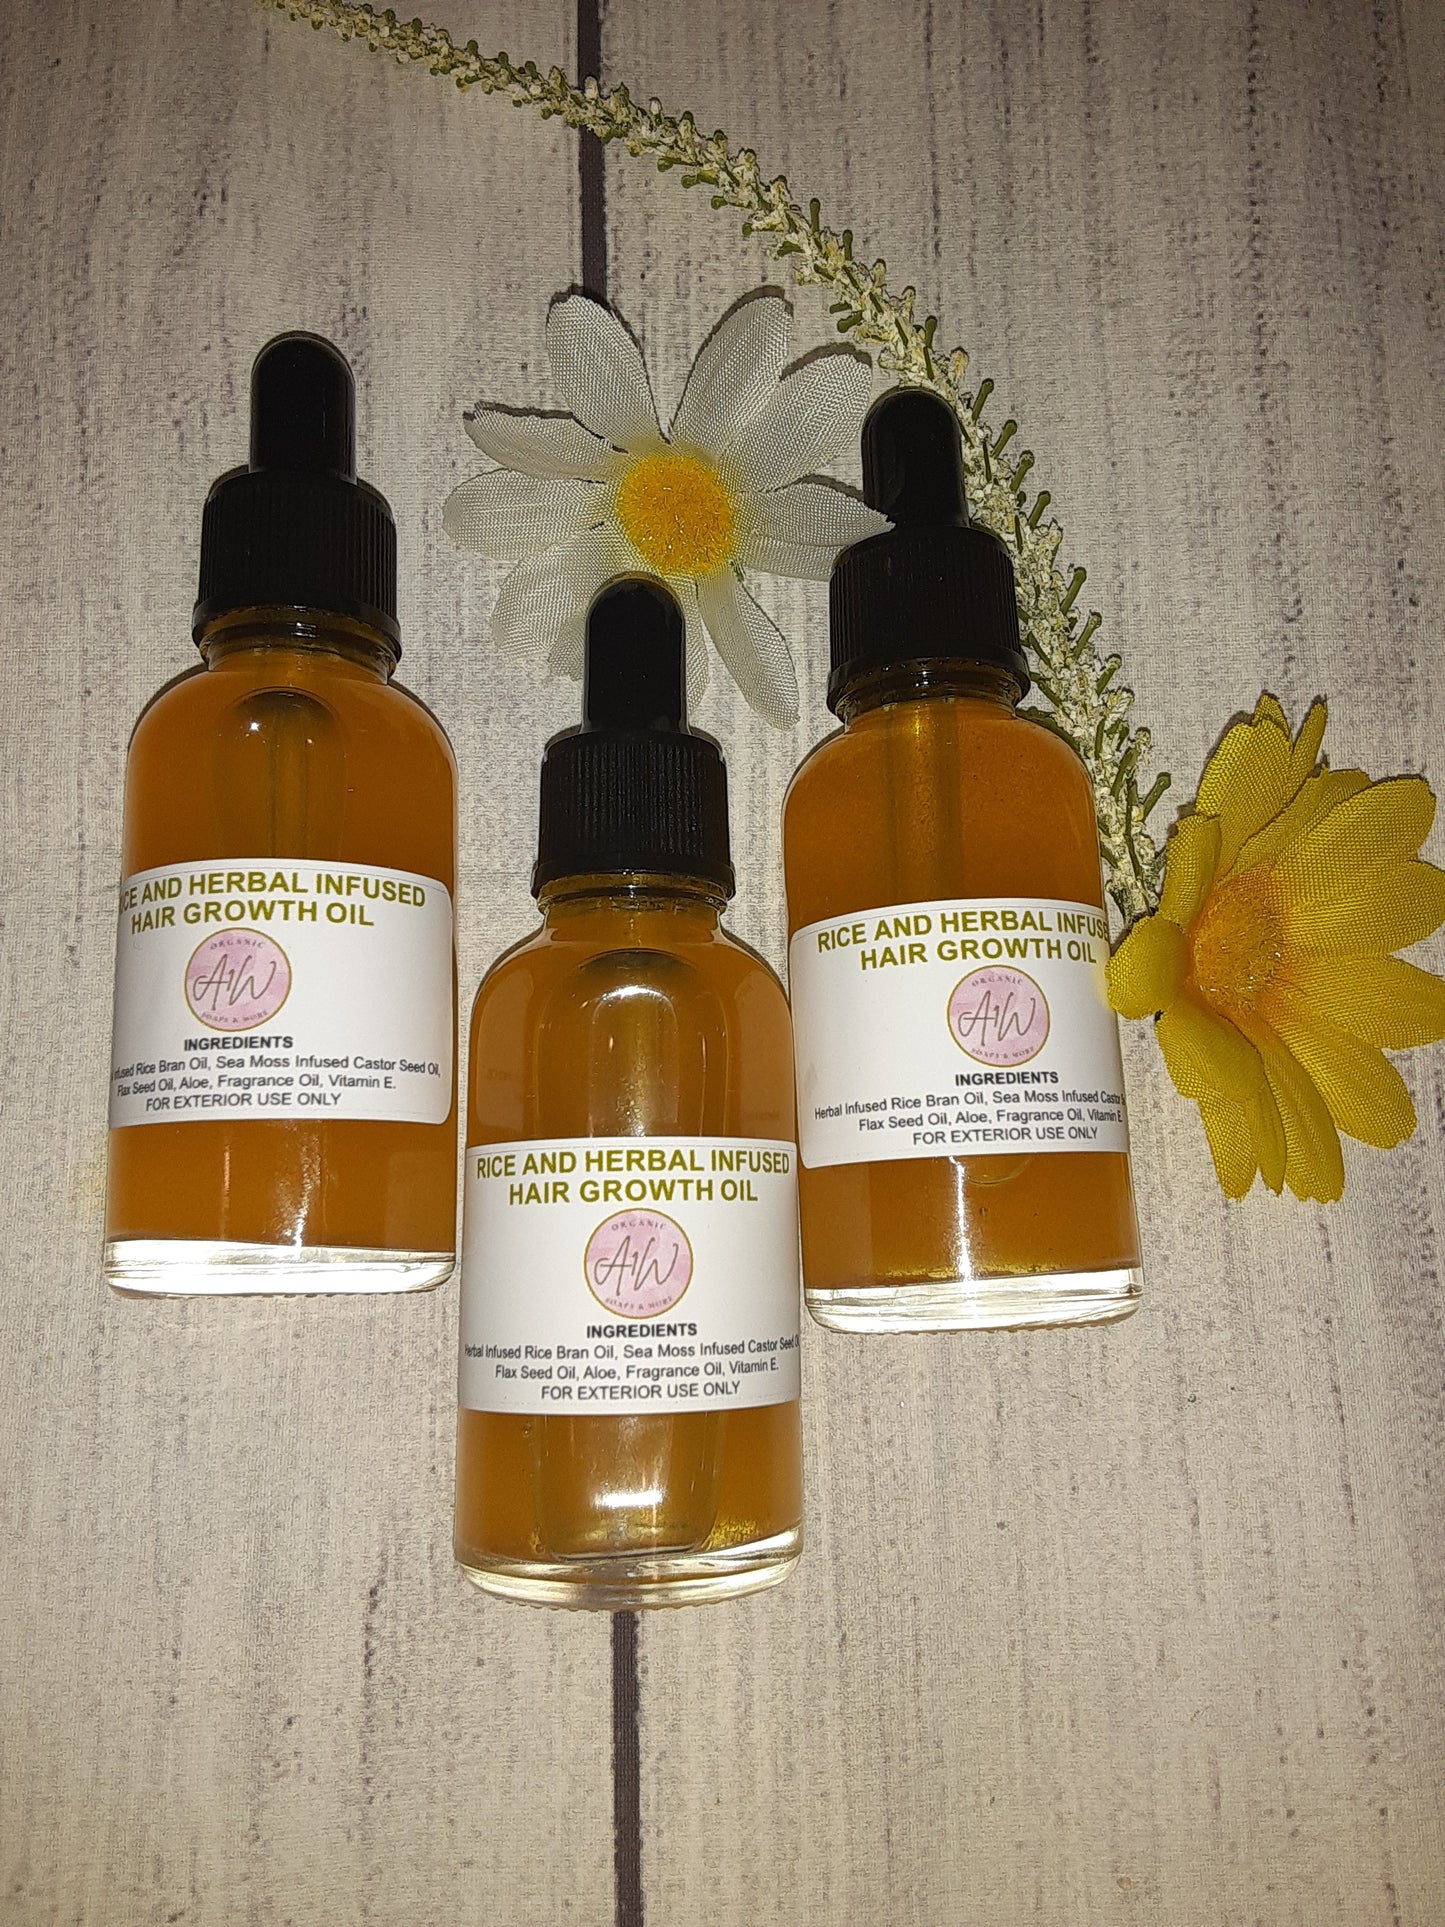 Rice and Herbal Infused Hair Growth Oil